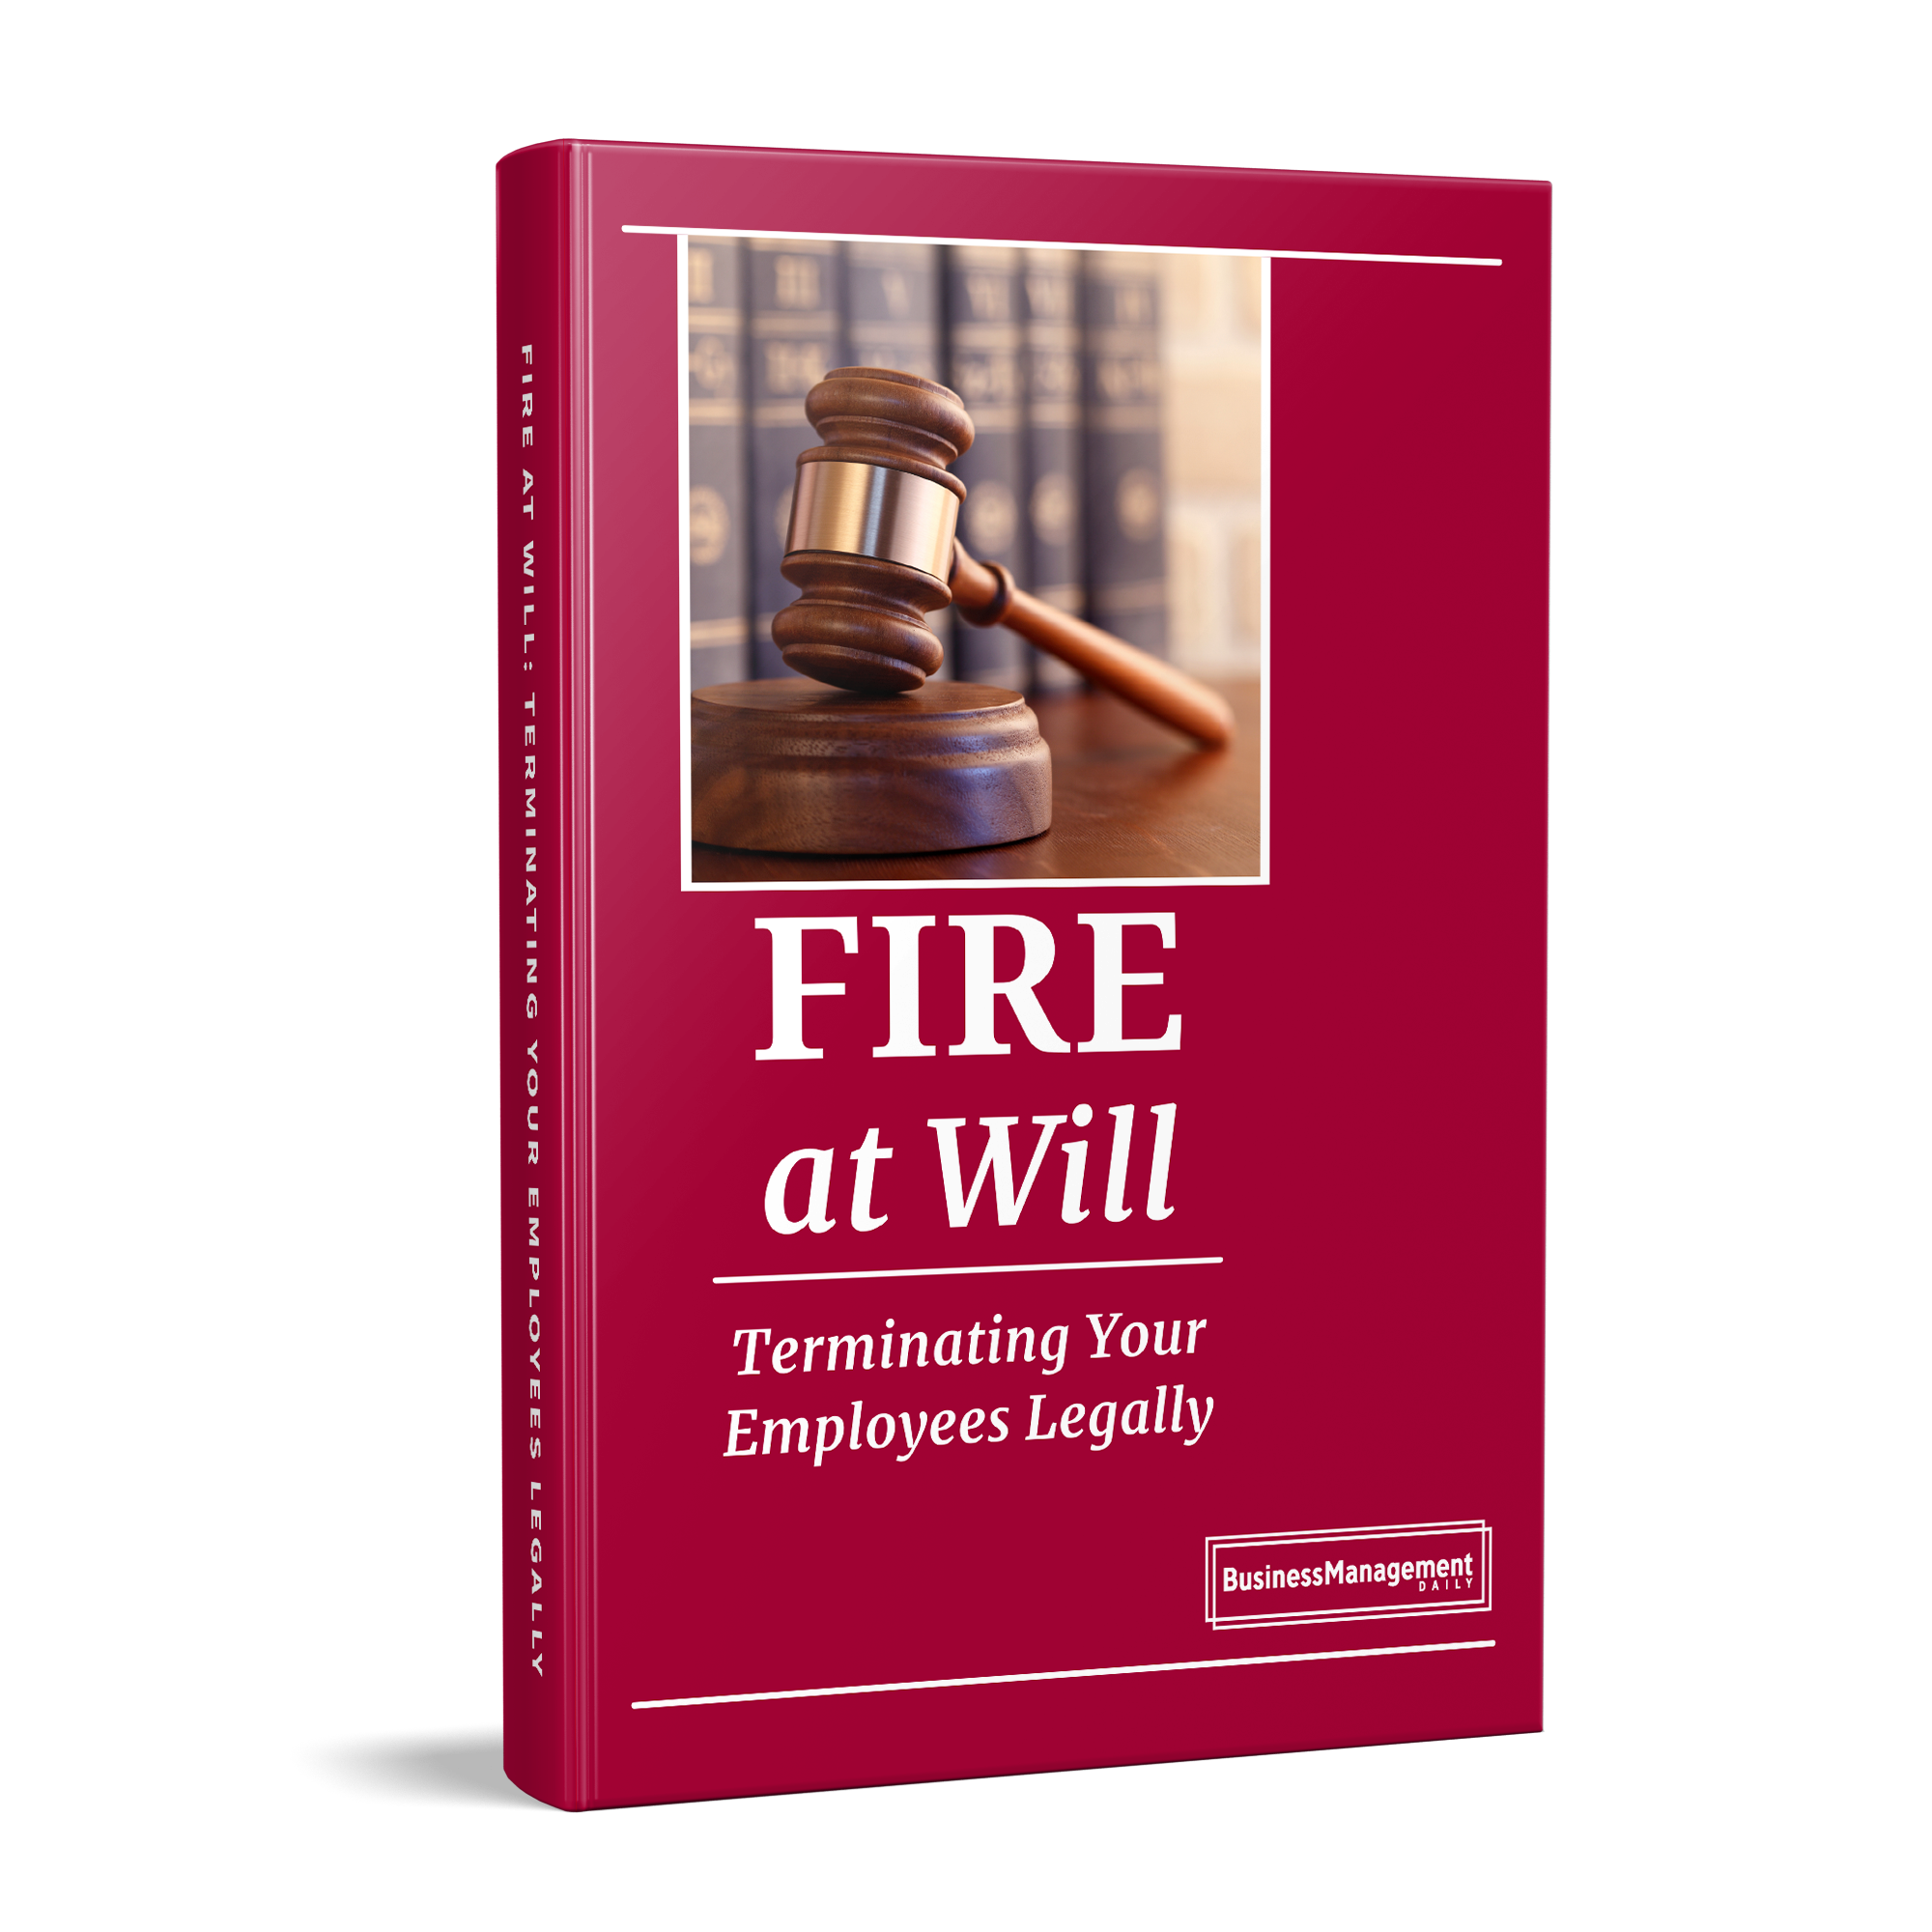 Fire at Will: Terminating Your Employees Legally